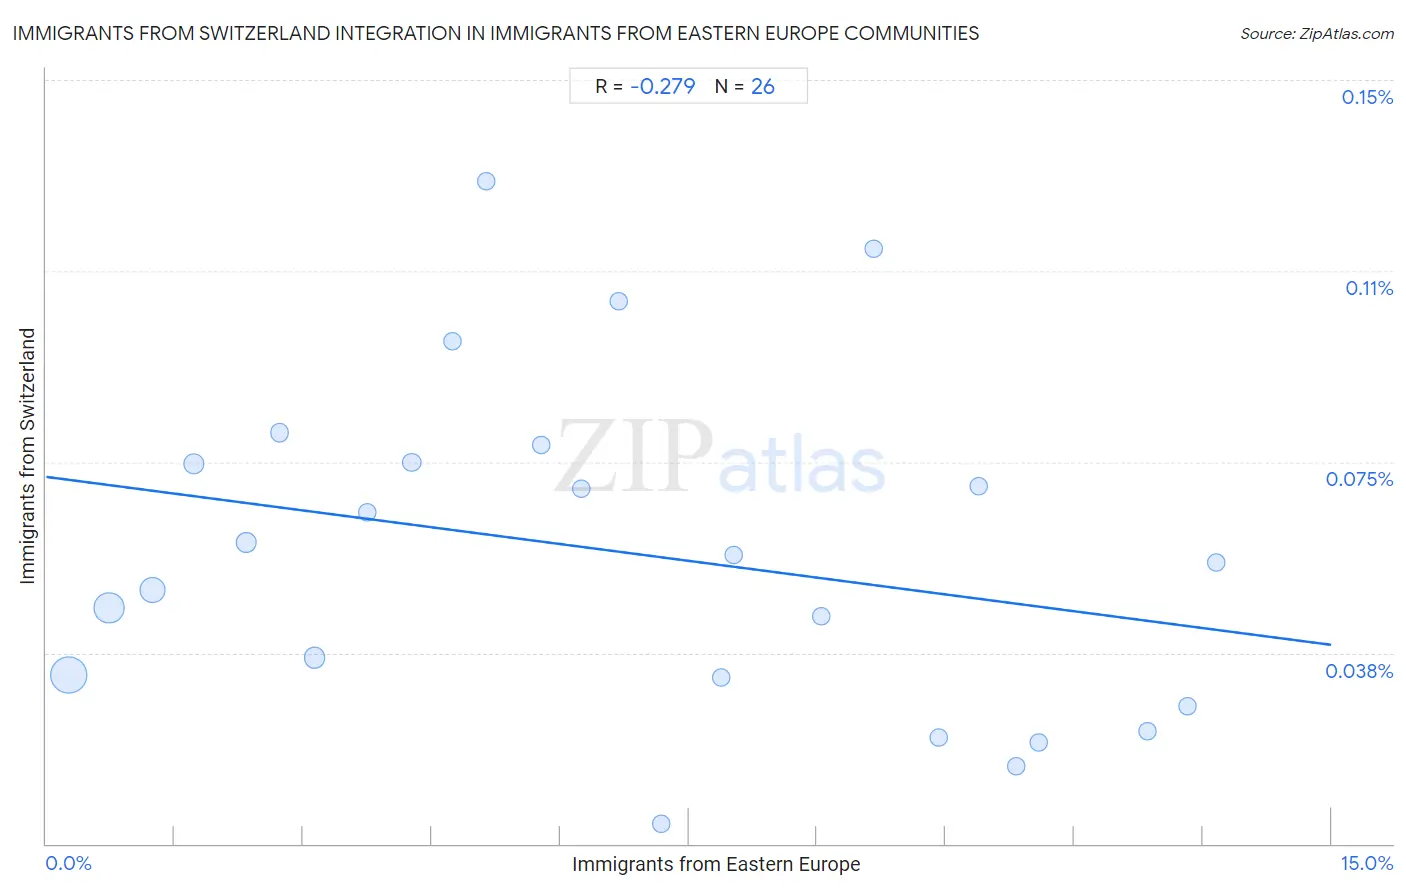 Immigrants from Eastern Europe Integration in Immigrants from Switzerland Communities